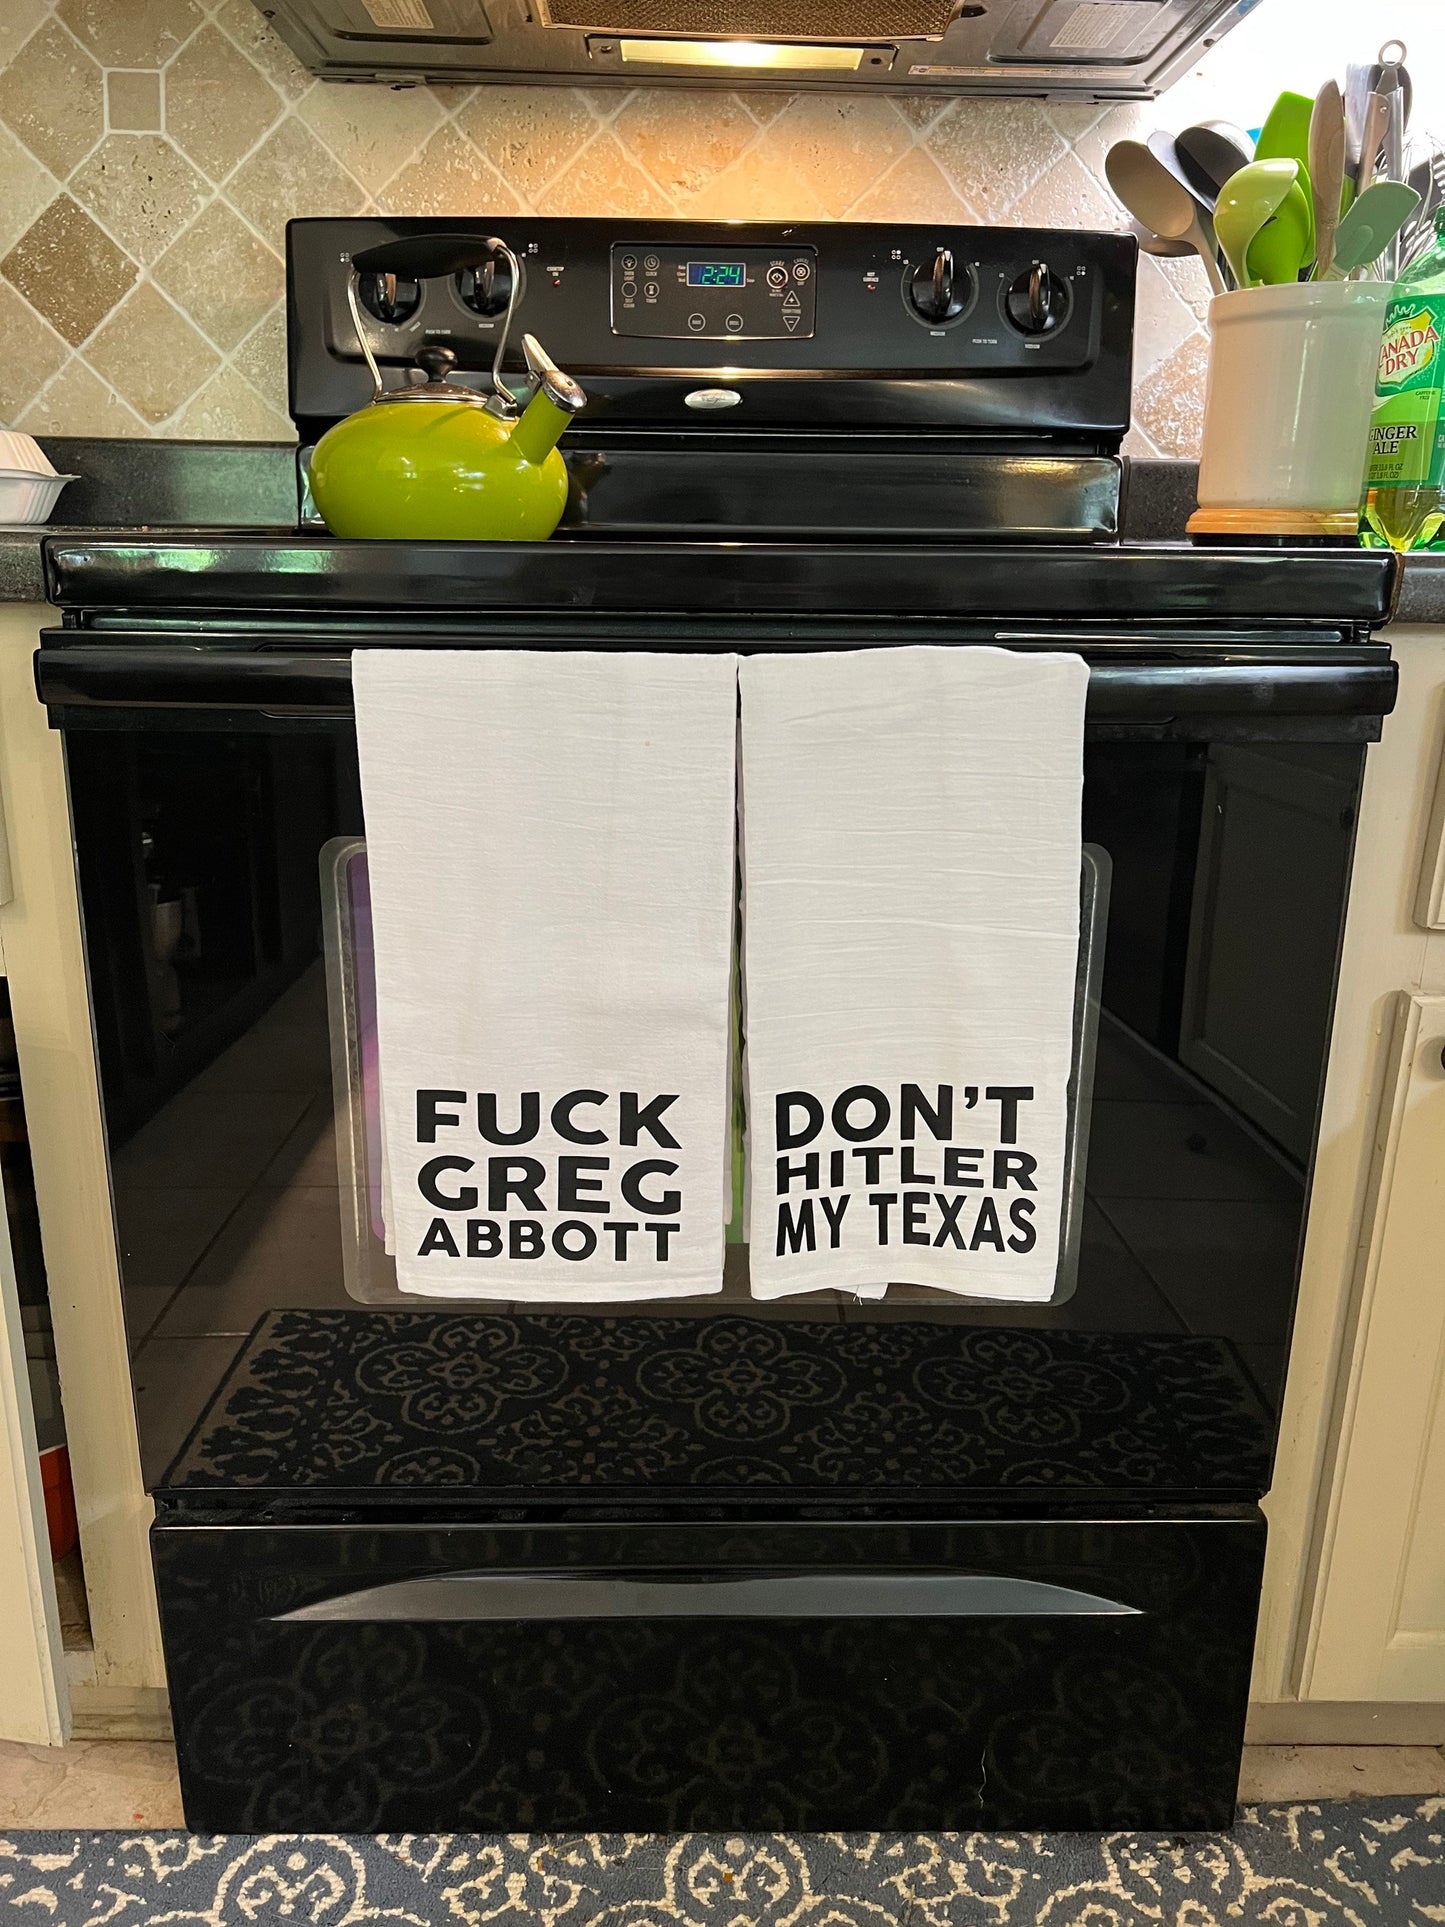 Don’t H!tler my Texas Fuck Greg Abbott Tea Towel Set - also available in DeSantis and Florida